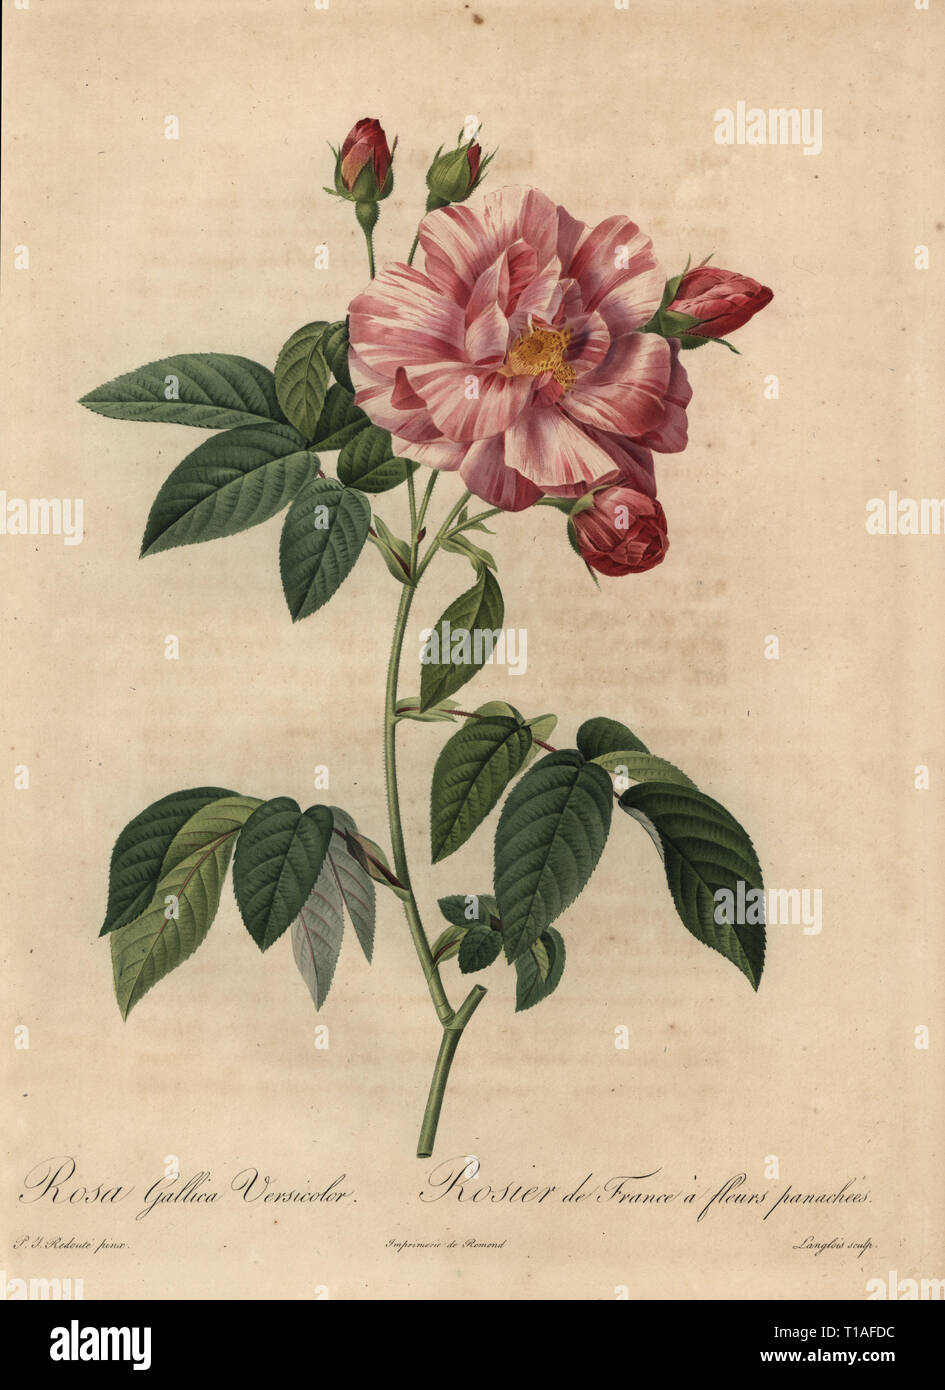 Pink and white Gallic rose or French rose, Rosa gallica versicolor, Rosier de France a fleurs panachees. Stipple copperplate engraving by Pierre Gabriel Langlois handcoloured a la poupee after a botanical illustration by Pierre-Joseph Redoute from the first folio edition of Les Roses, Firmin Didot, Paris, 1817. Stock Photo